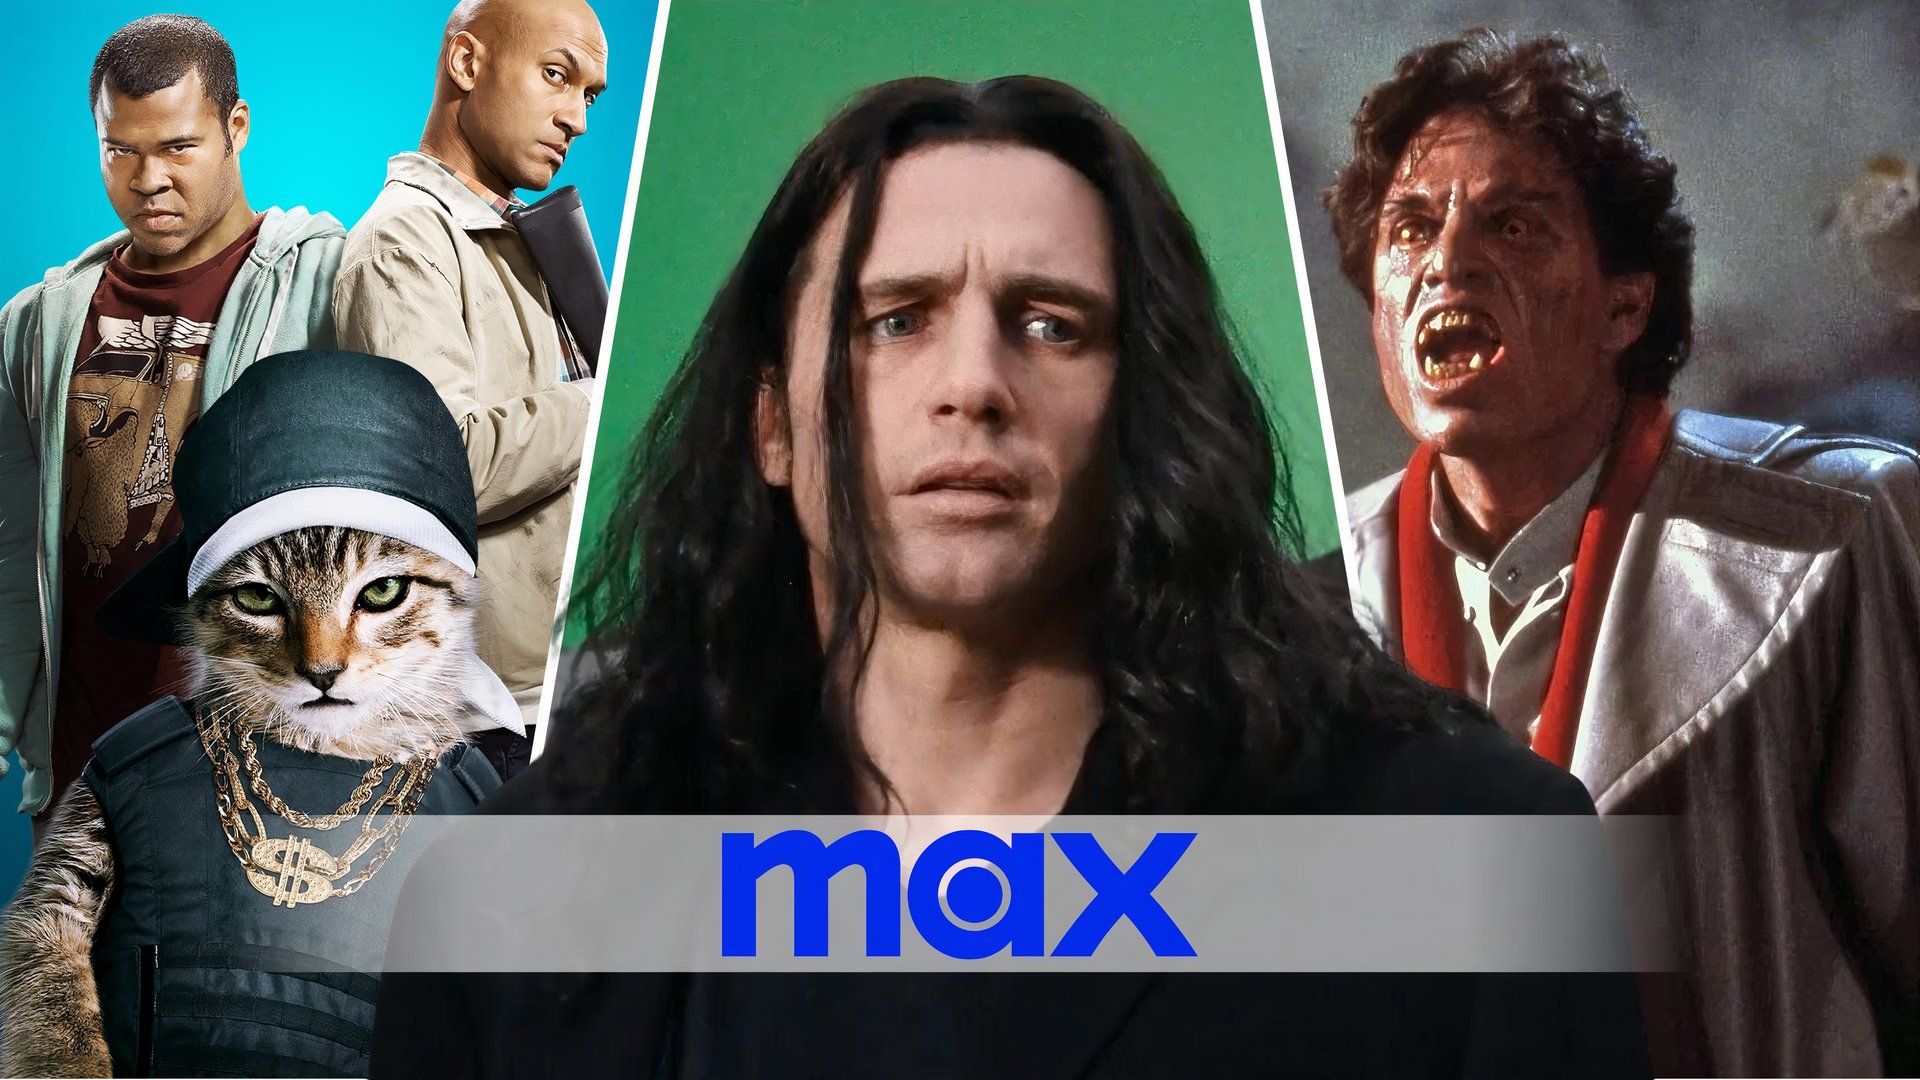 An edited image of three movies with the Max logo including The Disaster Artist, Fright Night, and Keanu